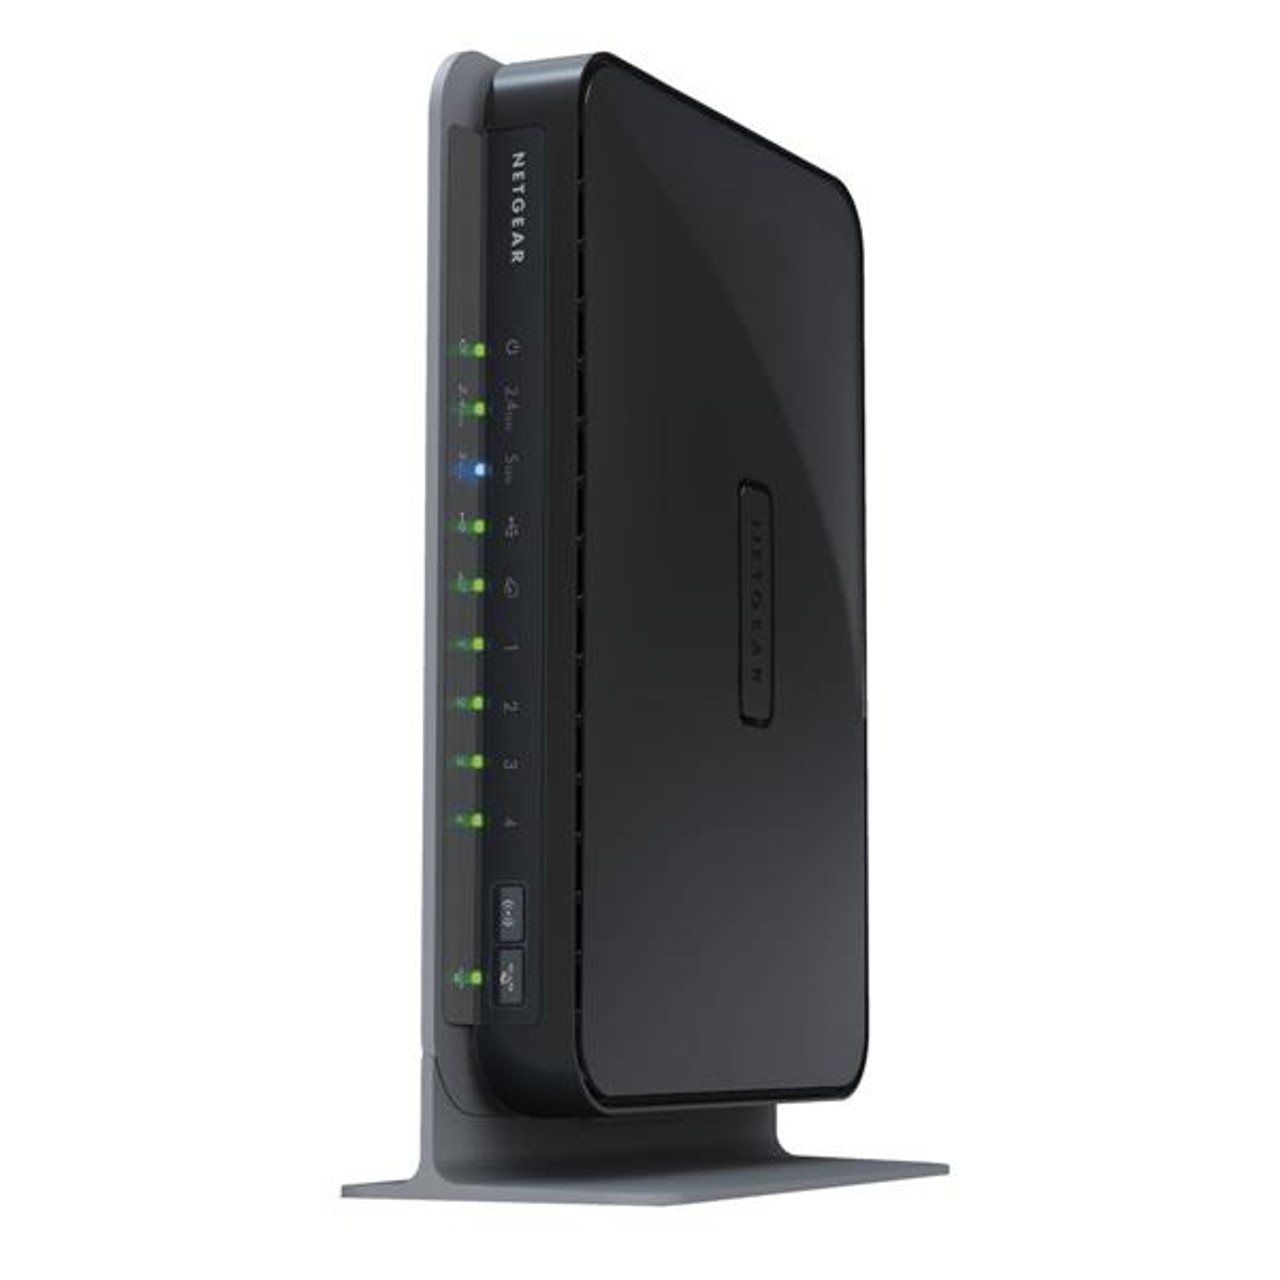 0712863 NetGear N600 (4x 10/100/1000Mbps Lan and 1x 10/100/1000Mbps WAN Port) Wireless Dual Band Gigabit Router (Refurbished)